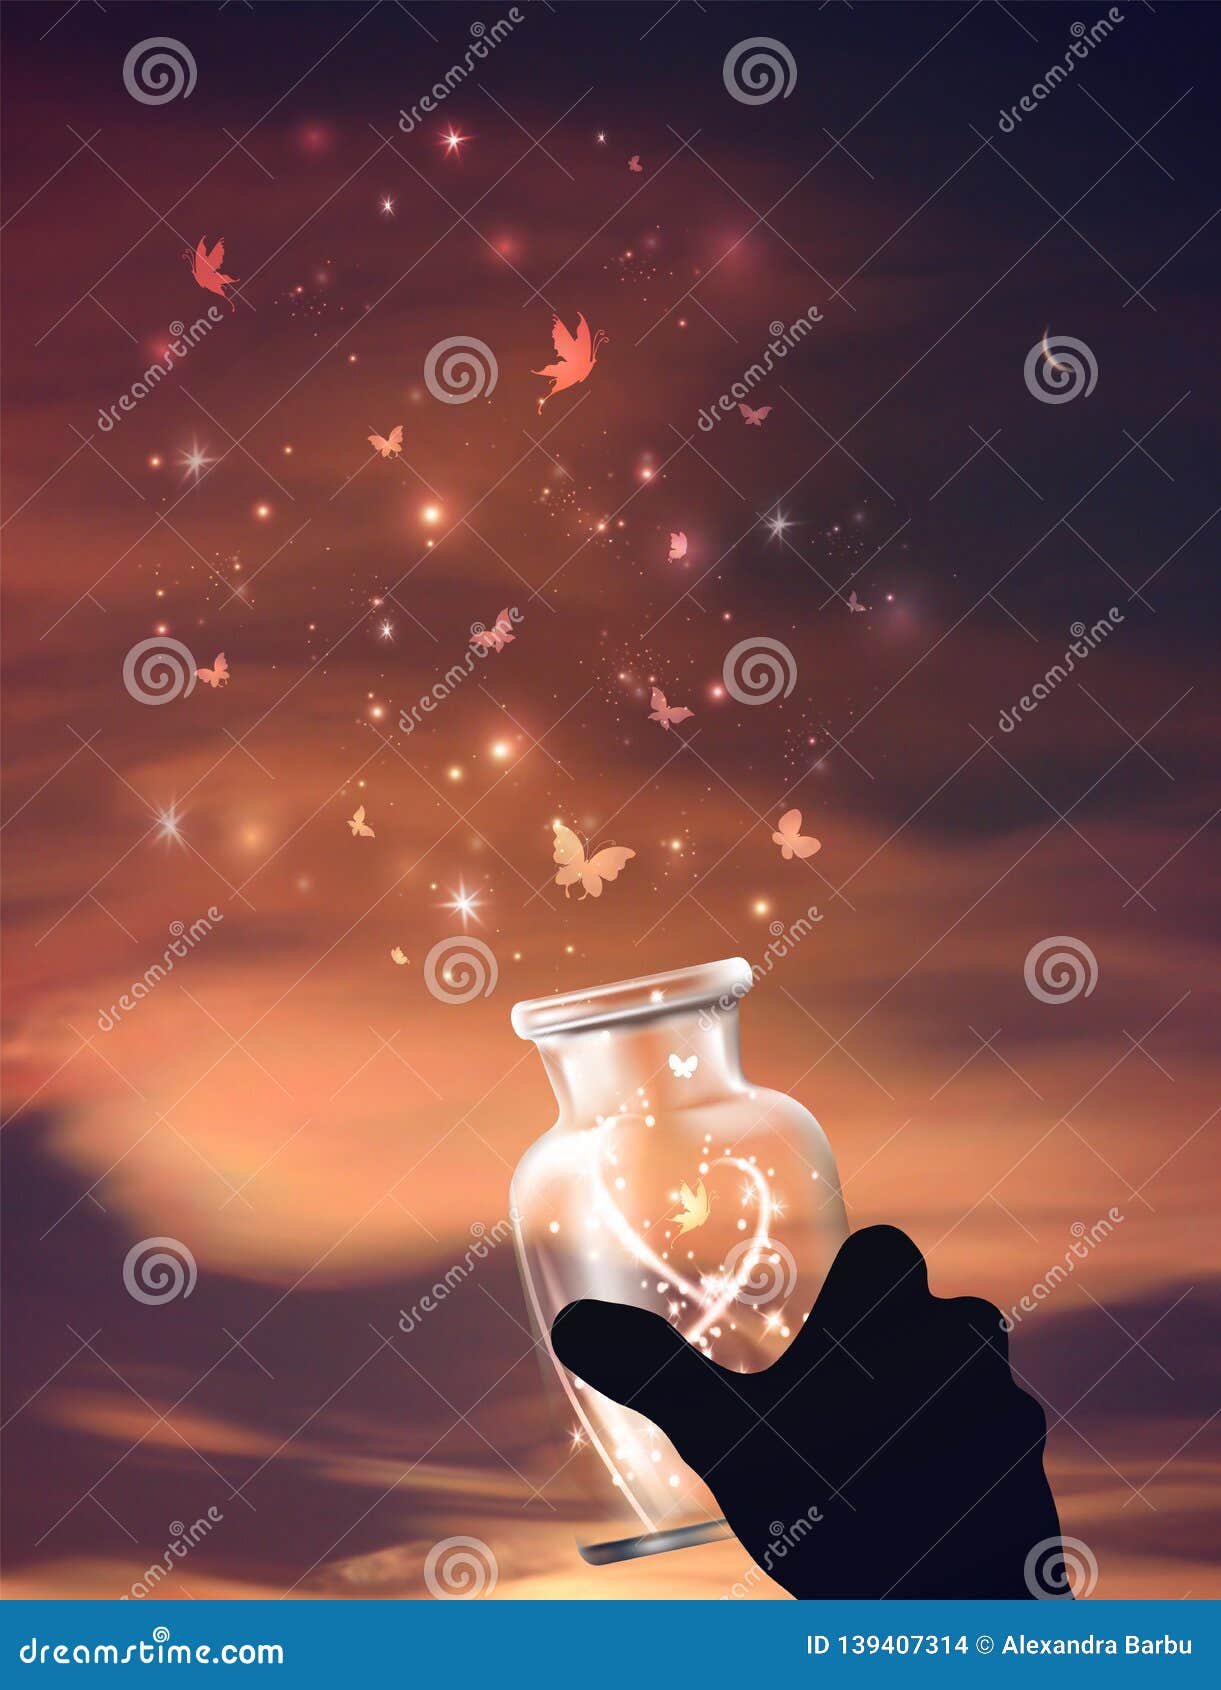 butterflies escaping from a vase, freedom, dreams